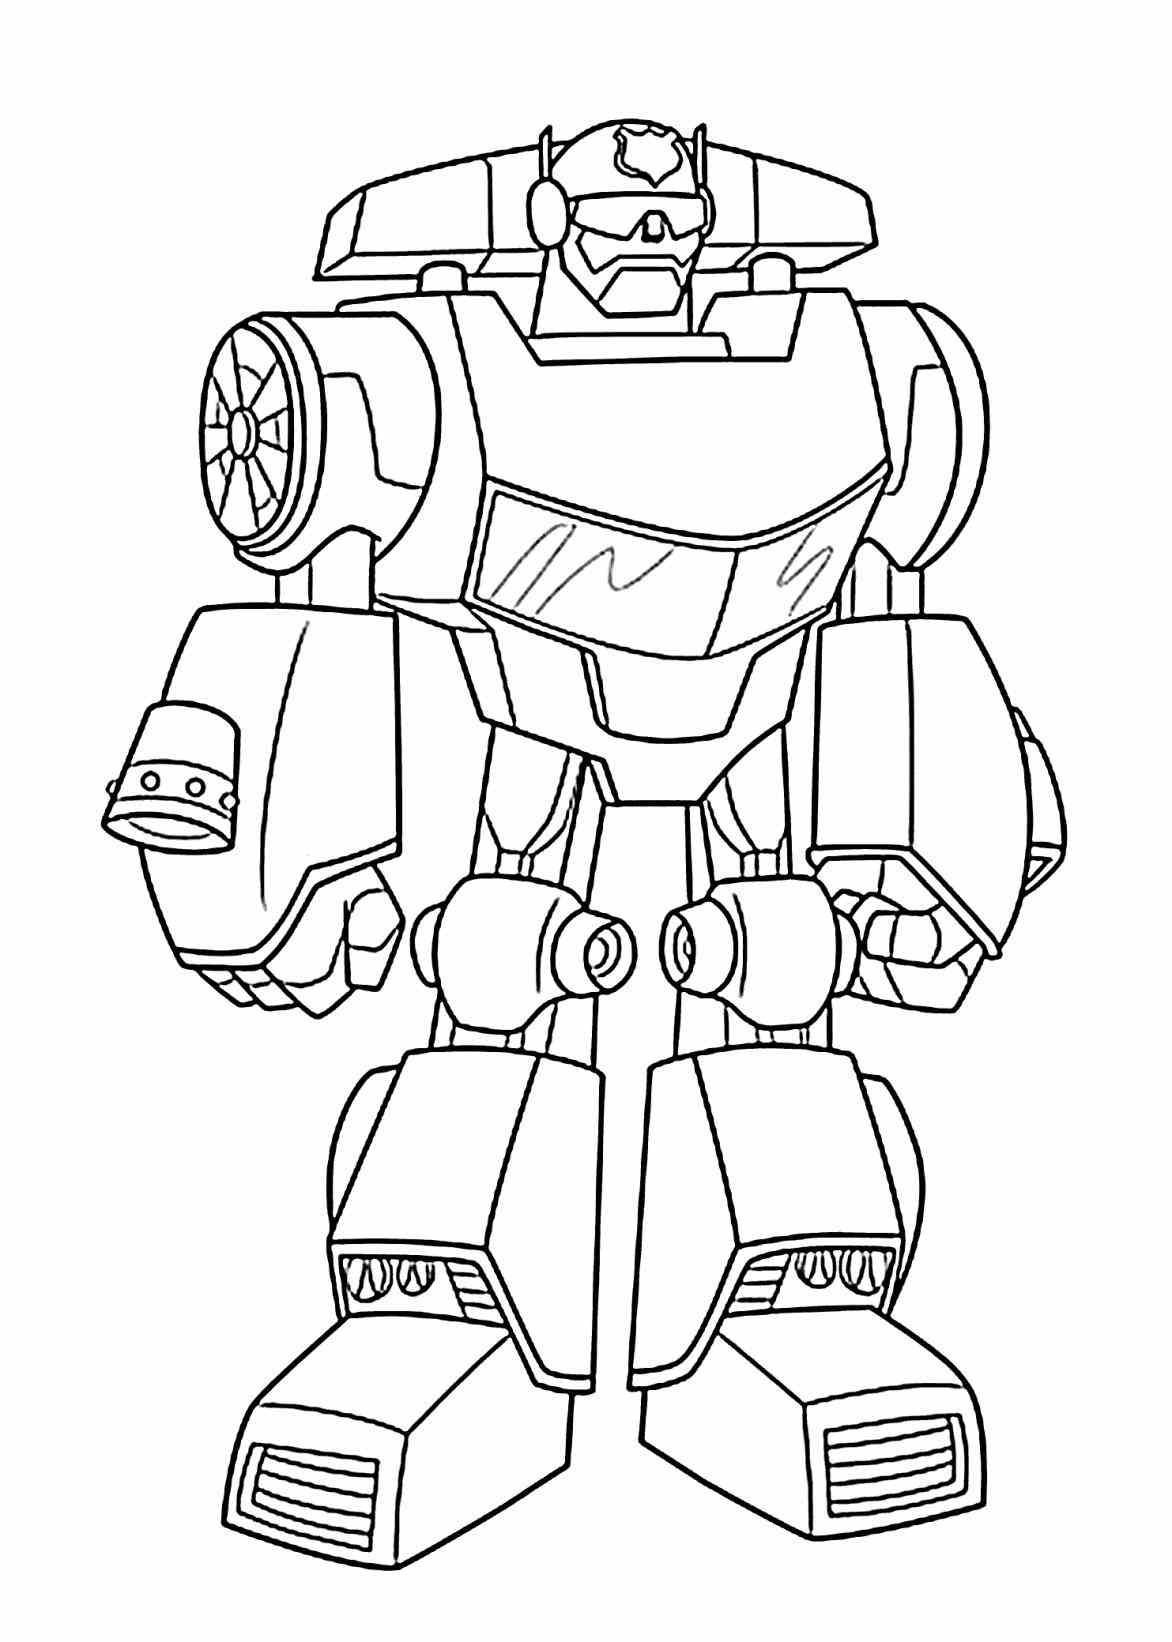 car-bumblebee-coloring-page-free-printable-coloring-pages-for-kids